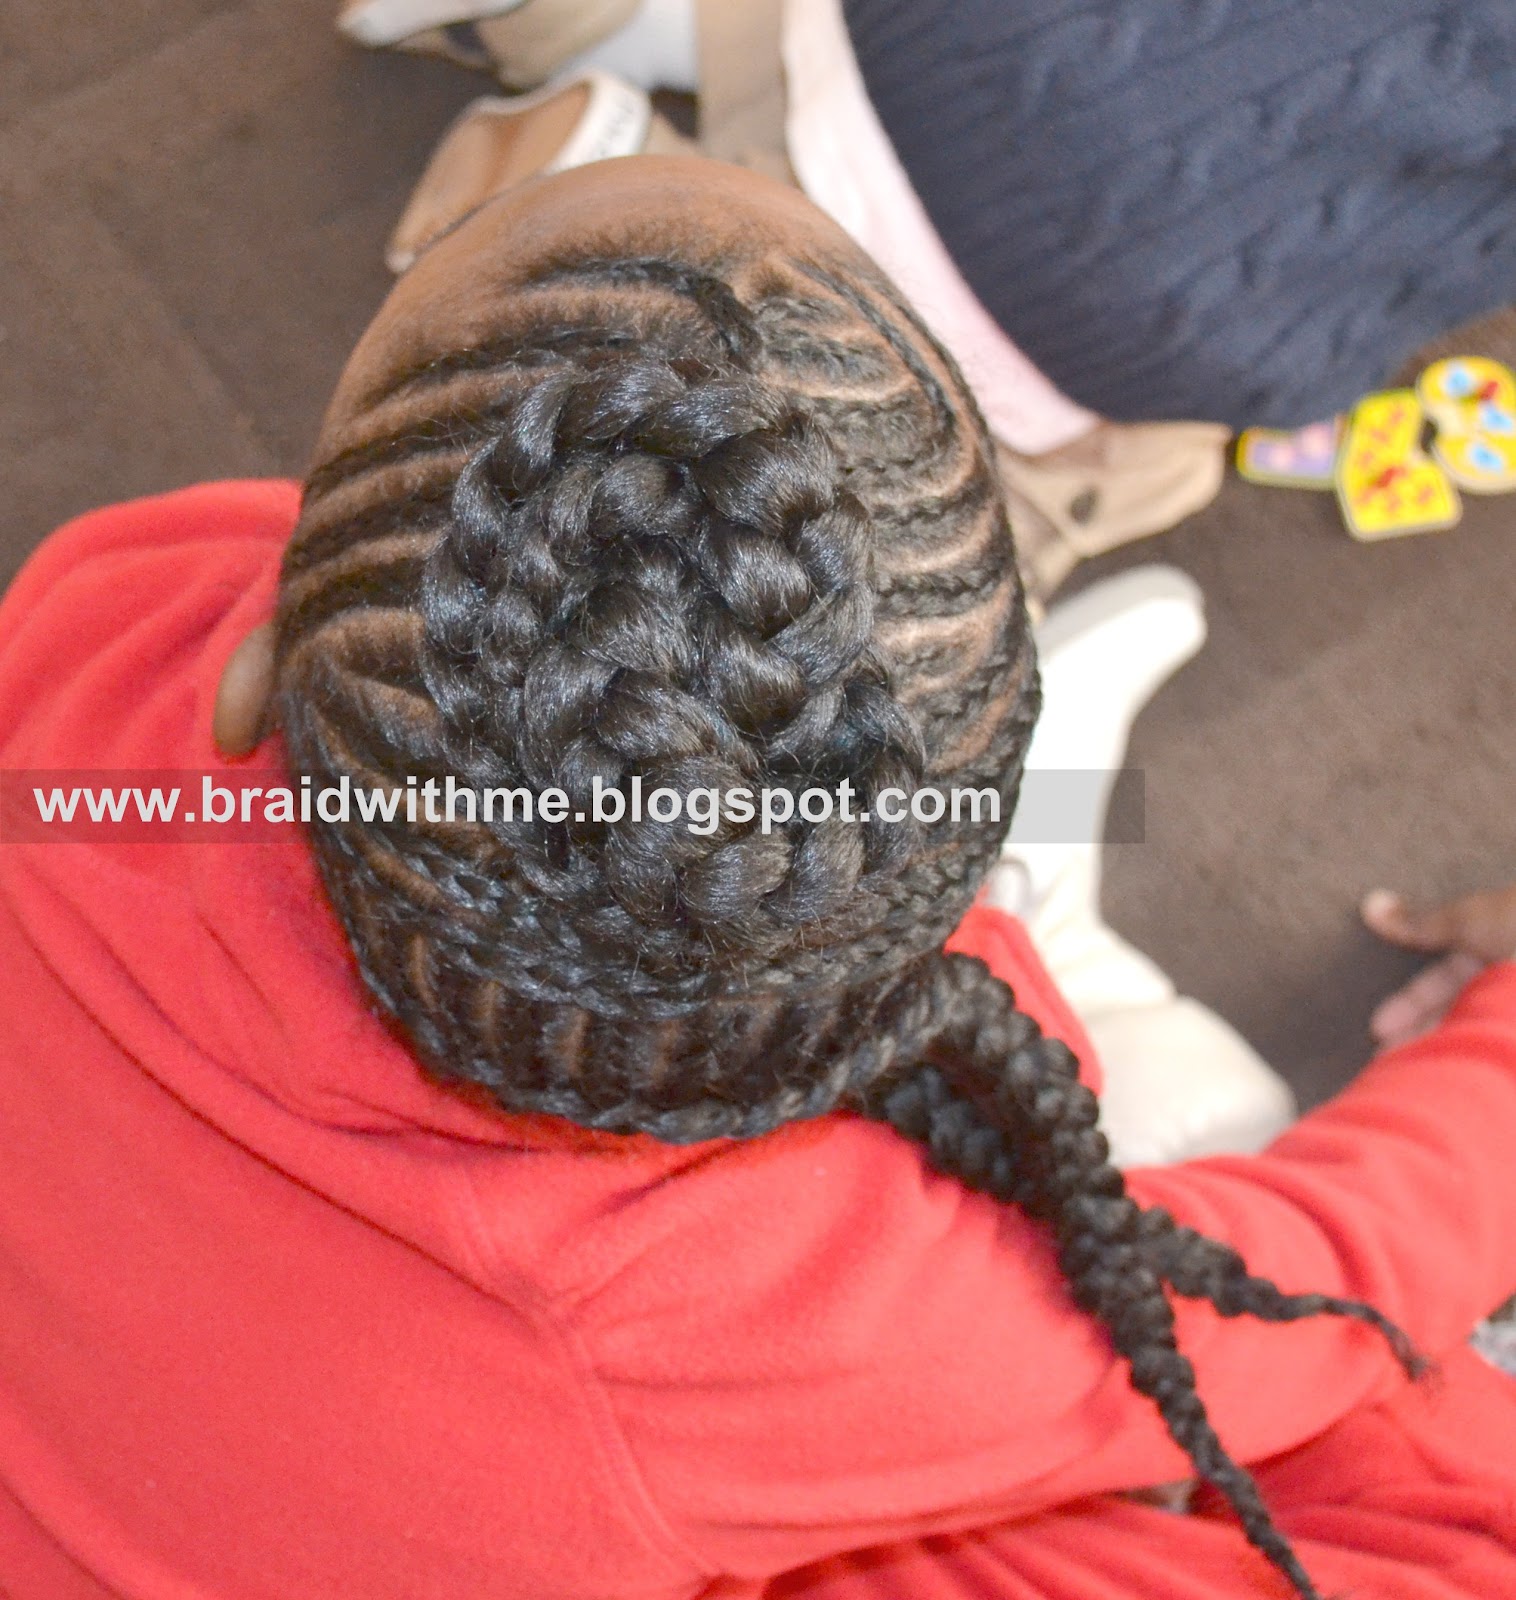 Braided Hairstyles For Little Girls With Beads Sections 1 and 2 were joined with sections 3 and 4 and secured in the 